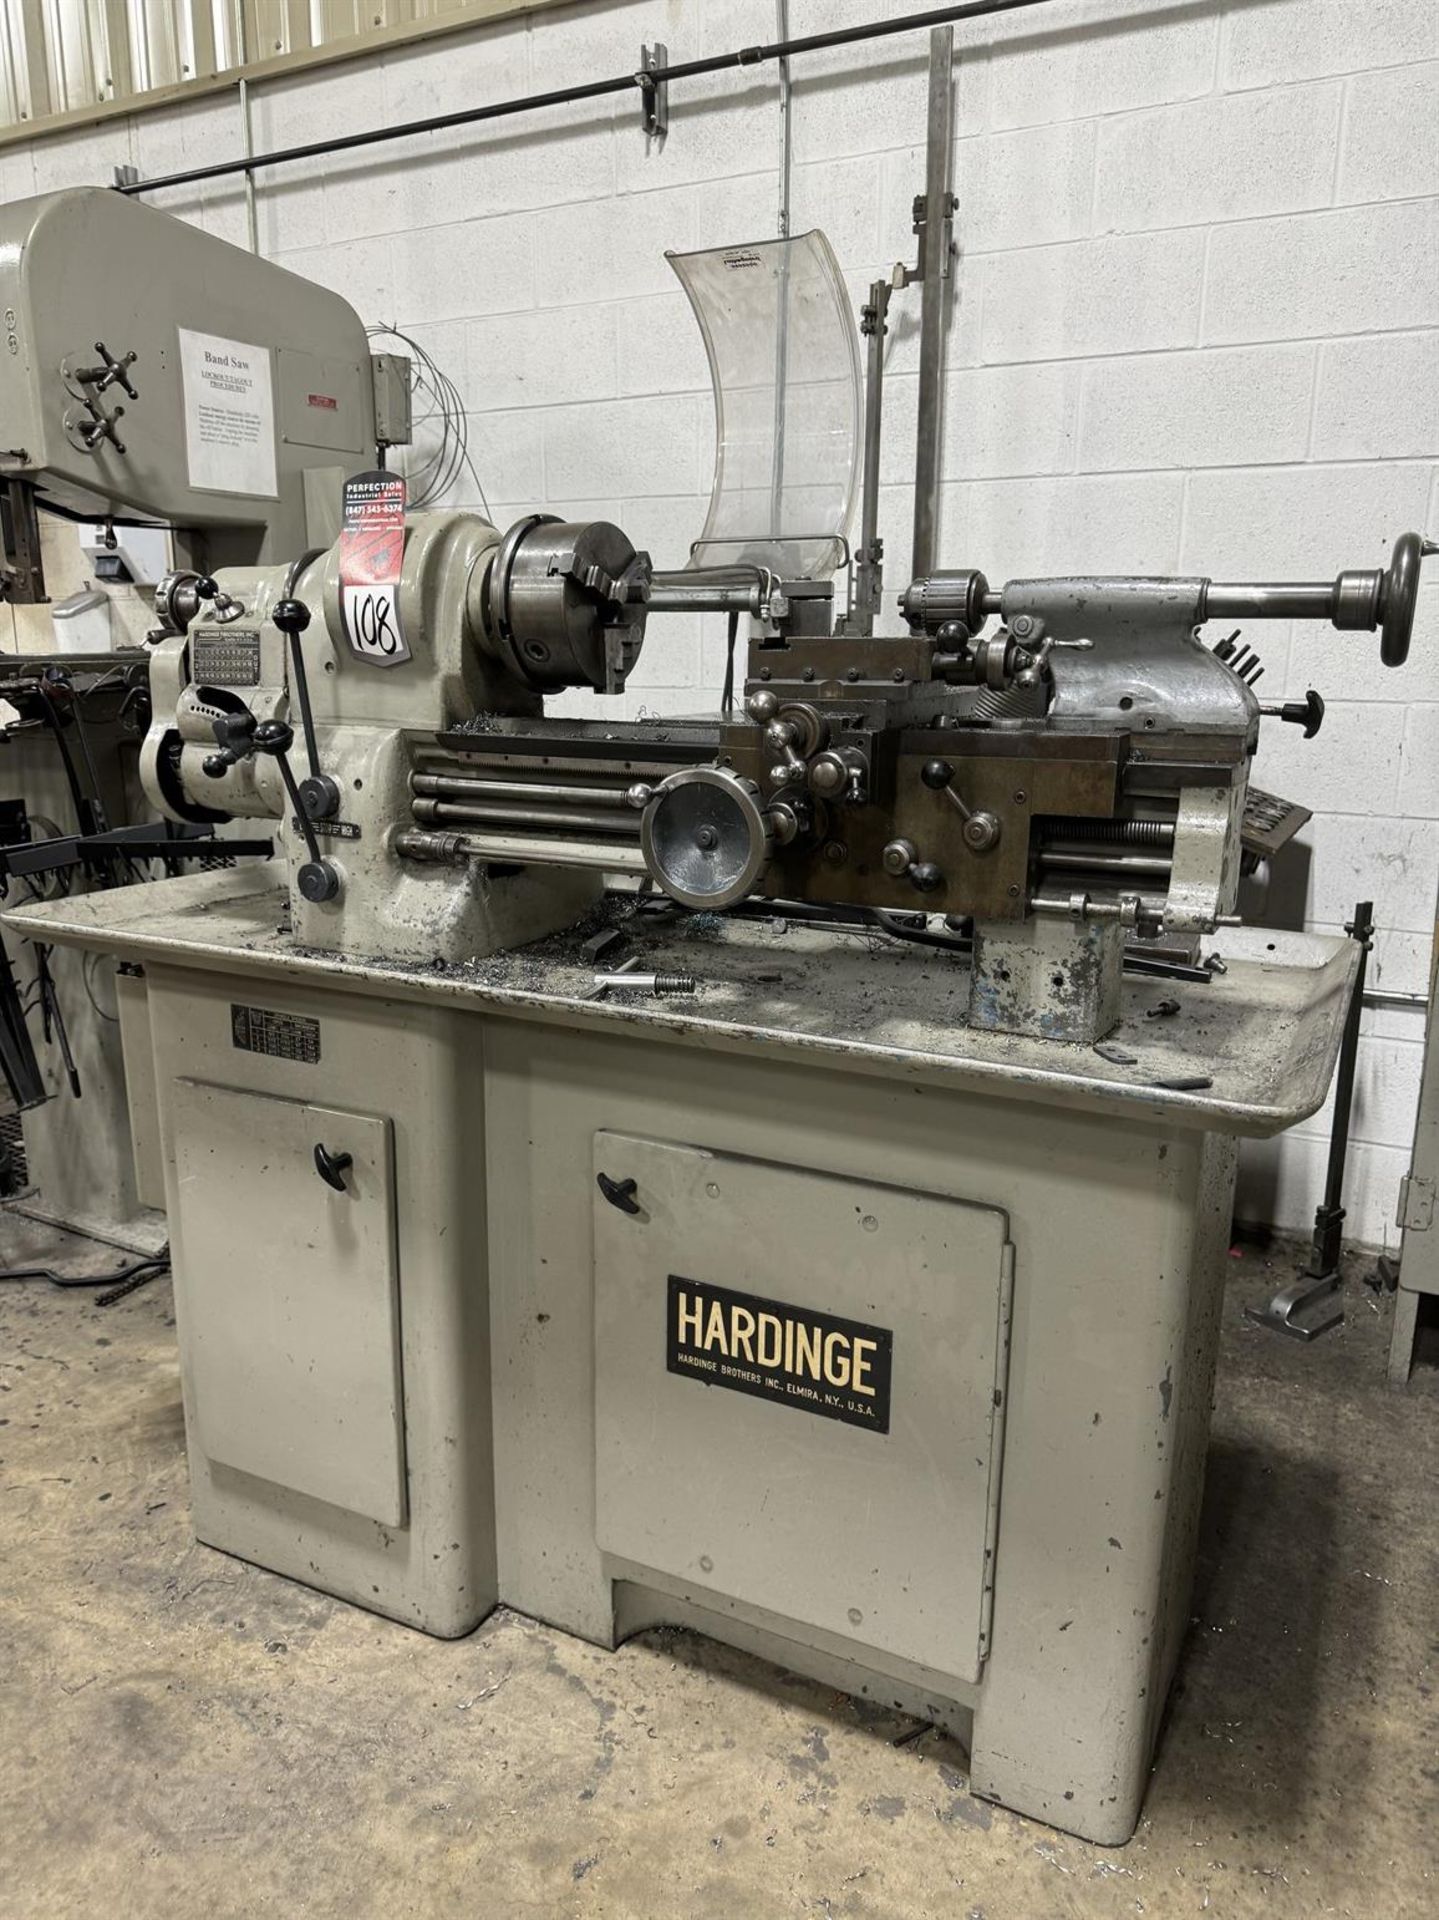 HARDINGE Precision Lathe, s/n na, 6" 3-Jaw Chuck, Tool Post, Tailstock, 27-1750 RPM Spindle Speed